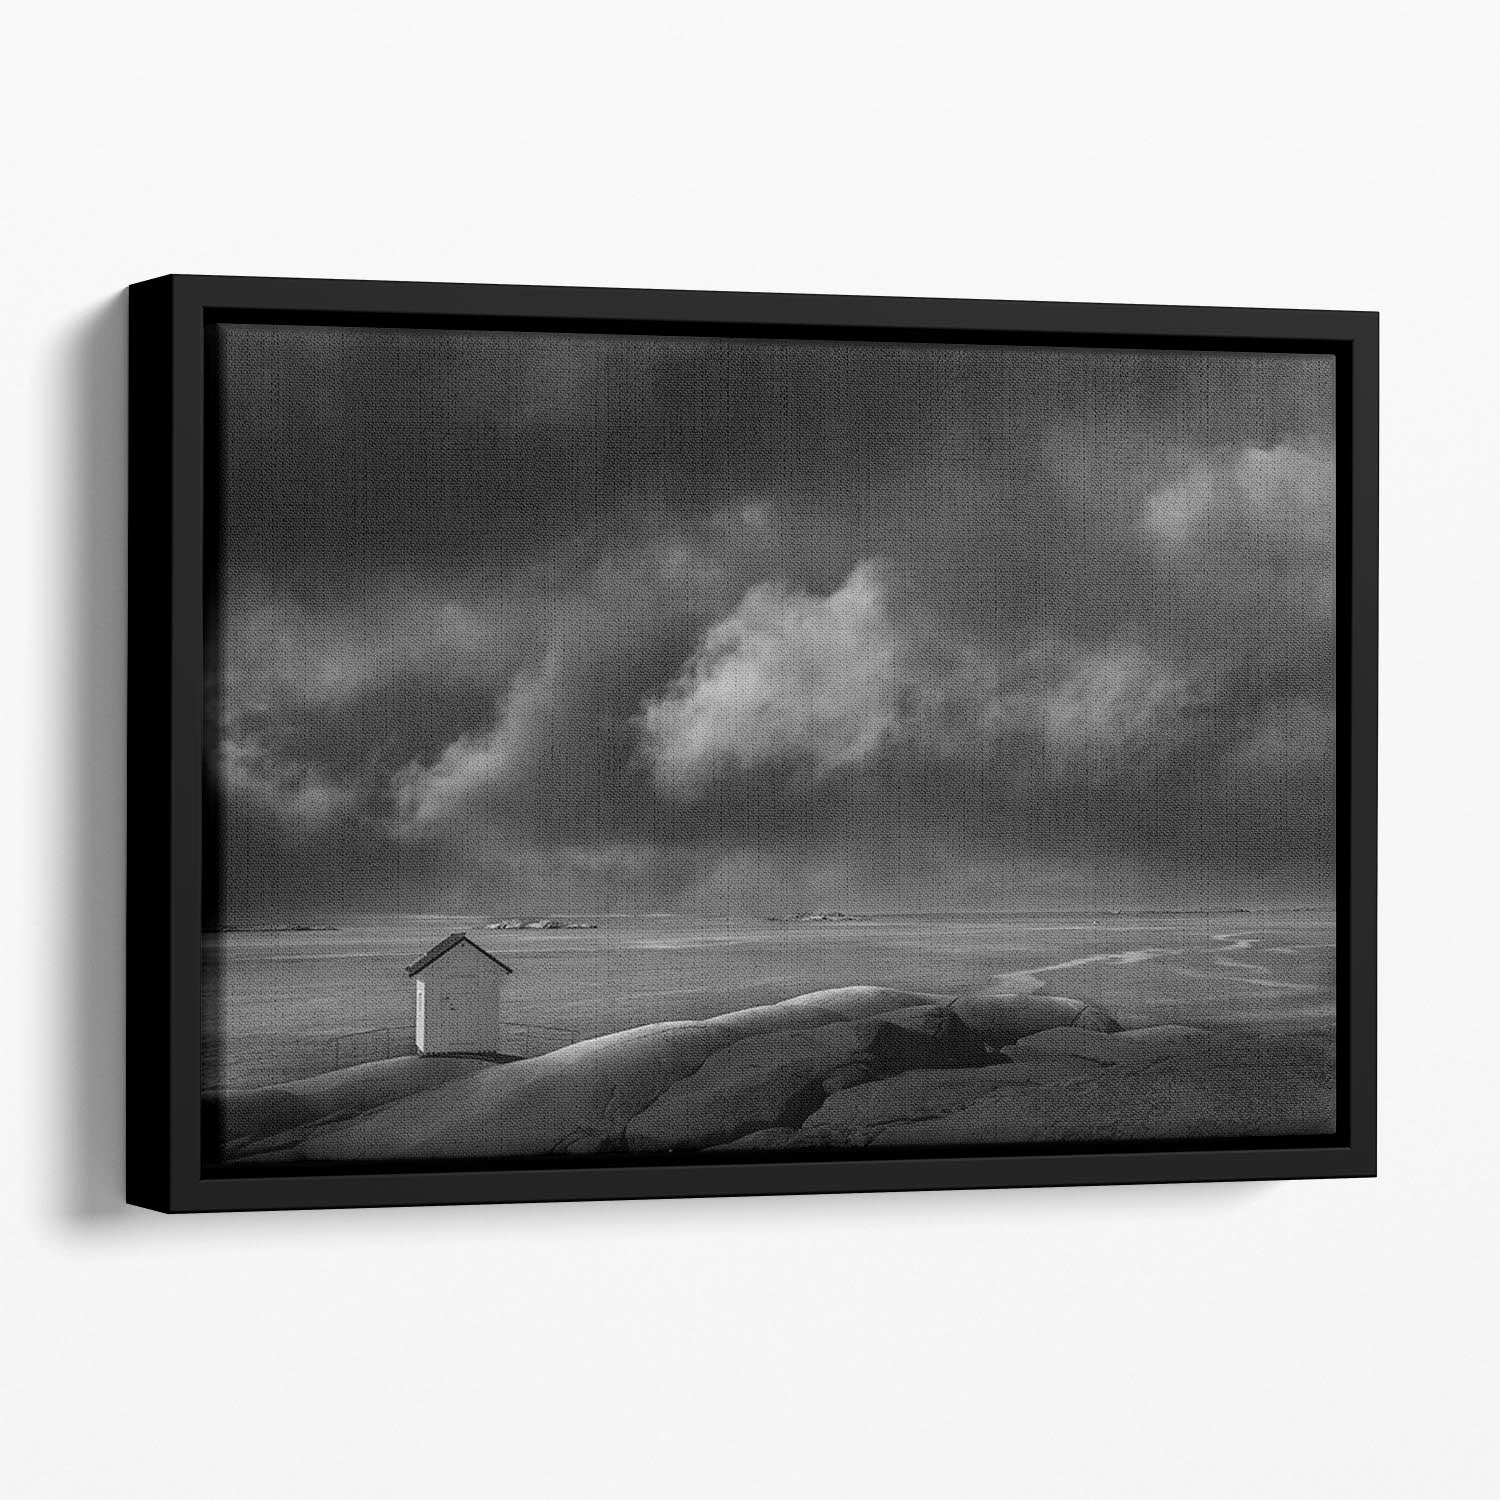 Shed On A Beach Floating Framed Canvas - Canvas Art Rocks - 1